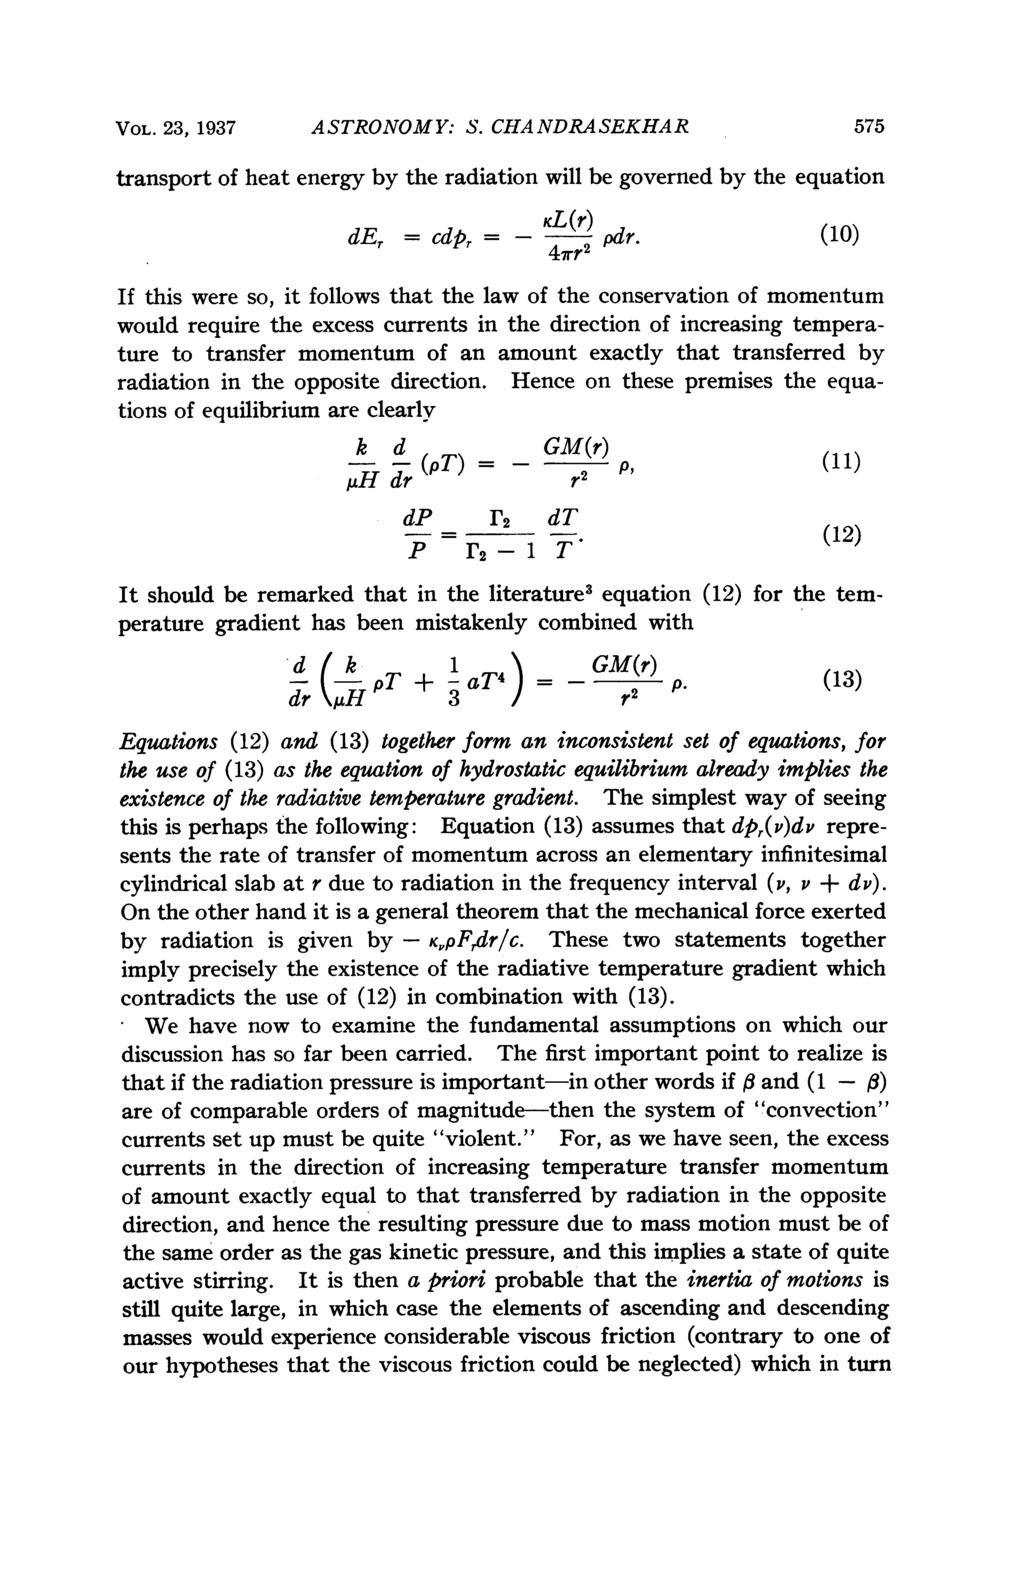 VOL. 23, 1937 ASTRONOMY: S. CHANDRASEKHAR 575 transport of heat energy by the radiation will be governed by the equation der = cdpr = - 4rr() pdr.